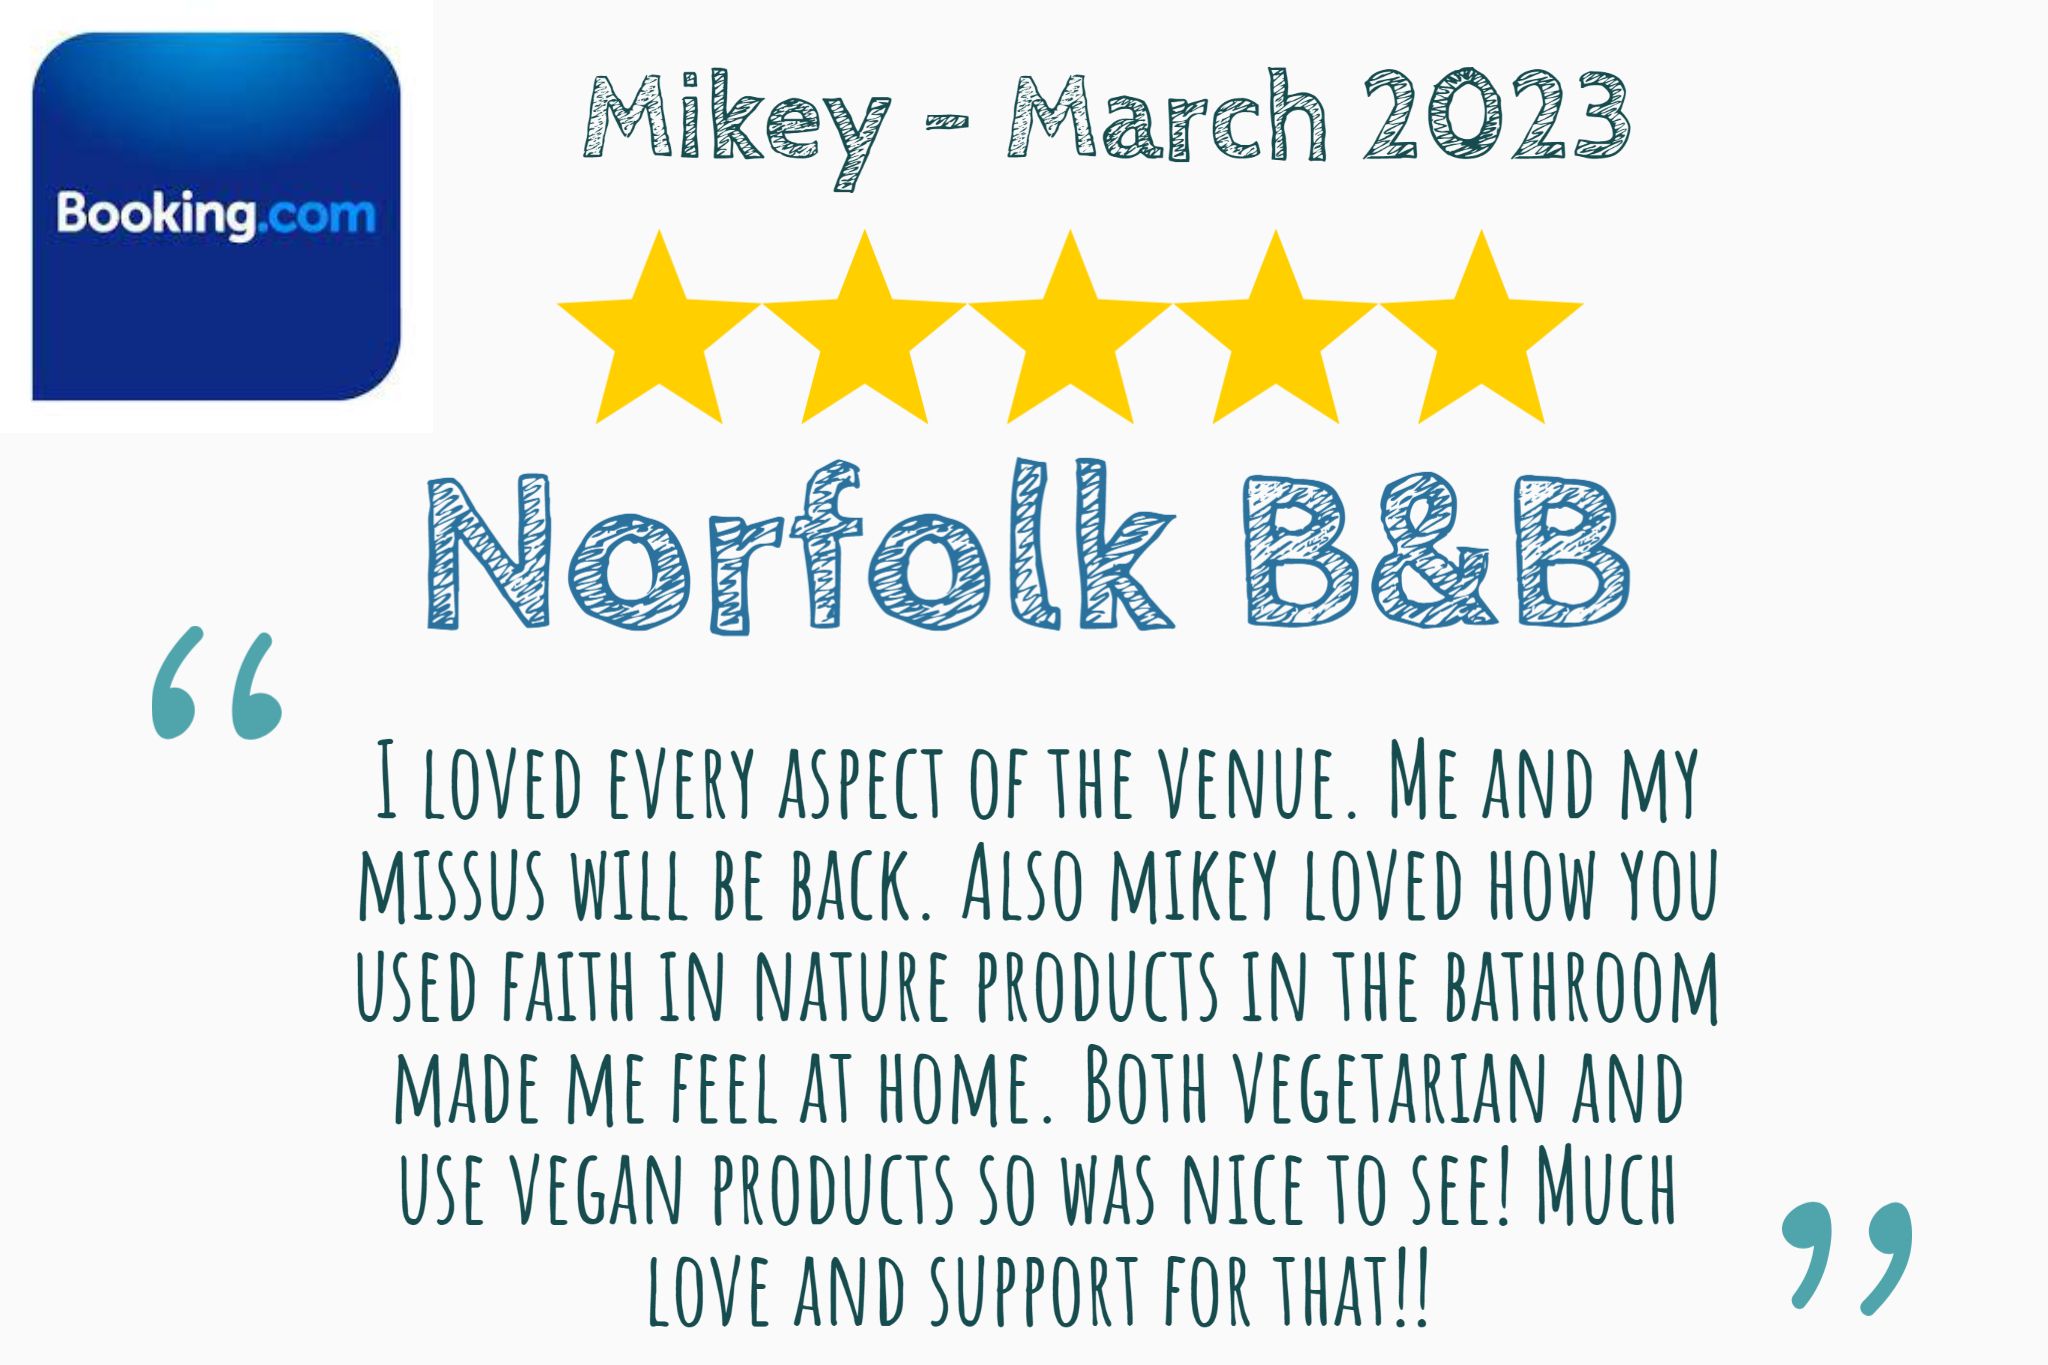 Mikey's Booking.com review of his short break with his wife, praising the use of vegetarian and vegan products